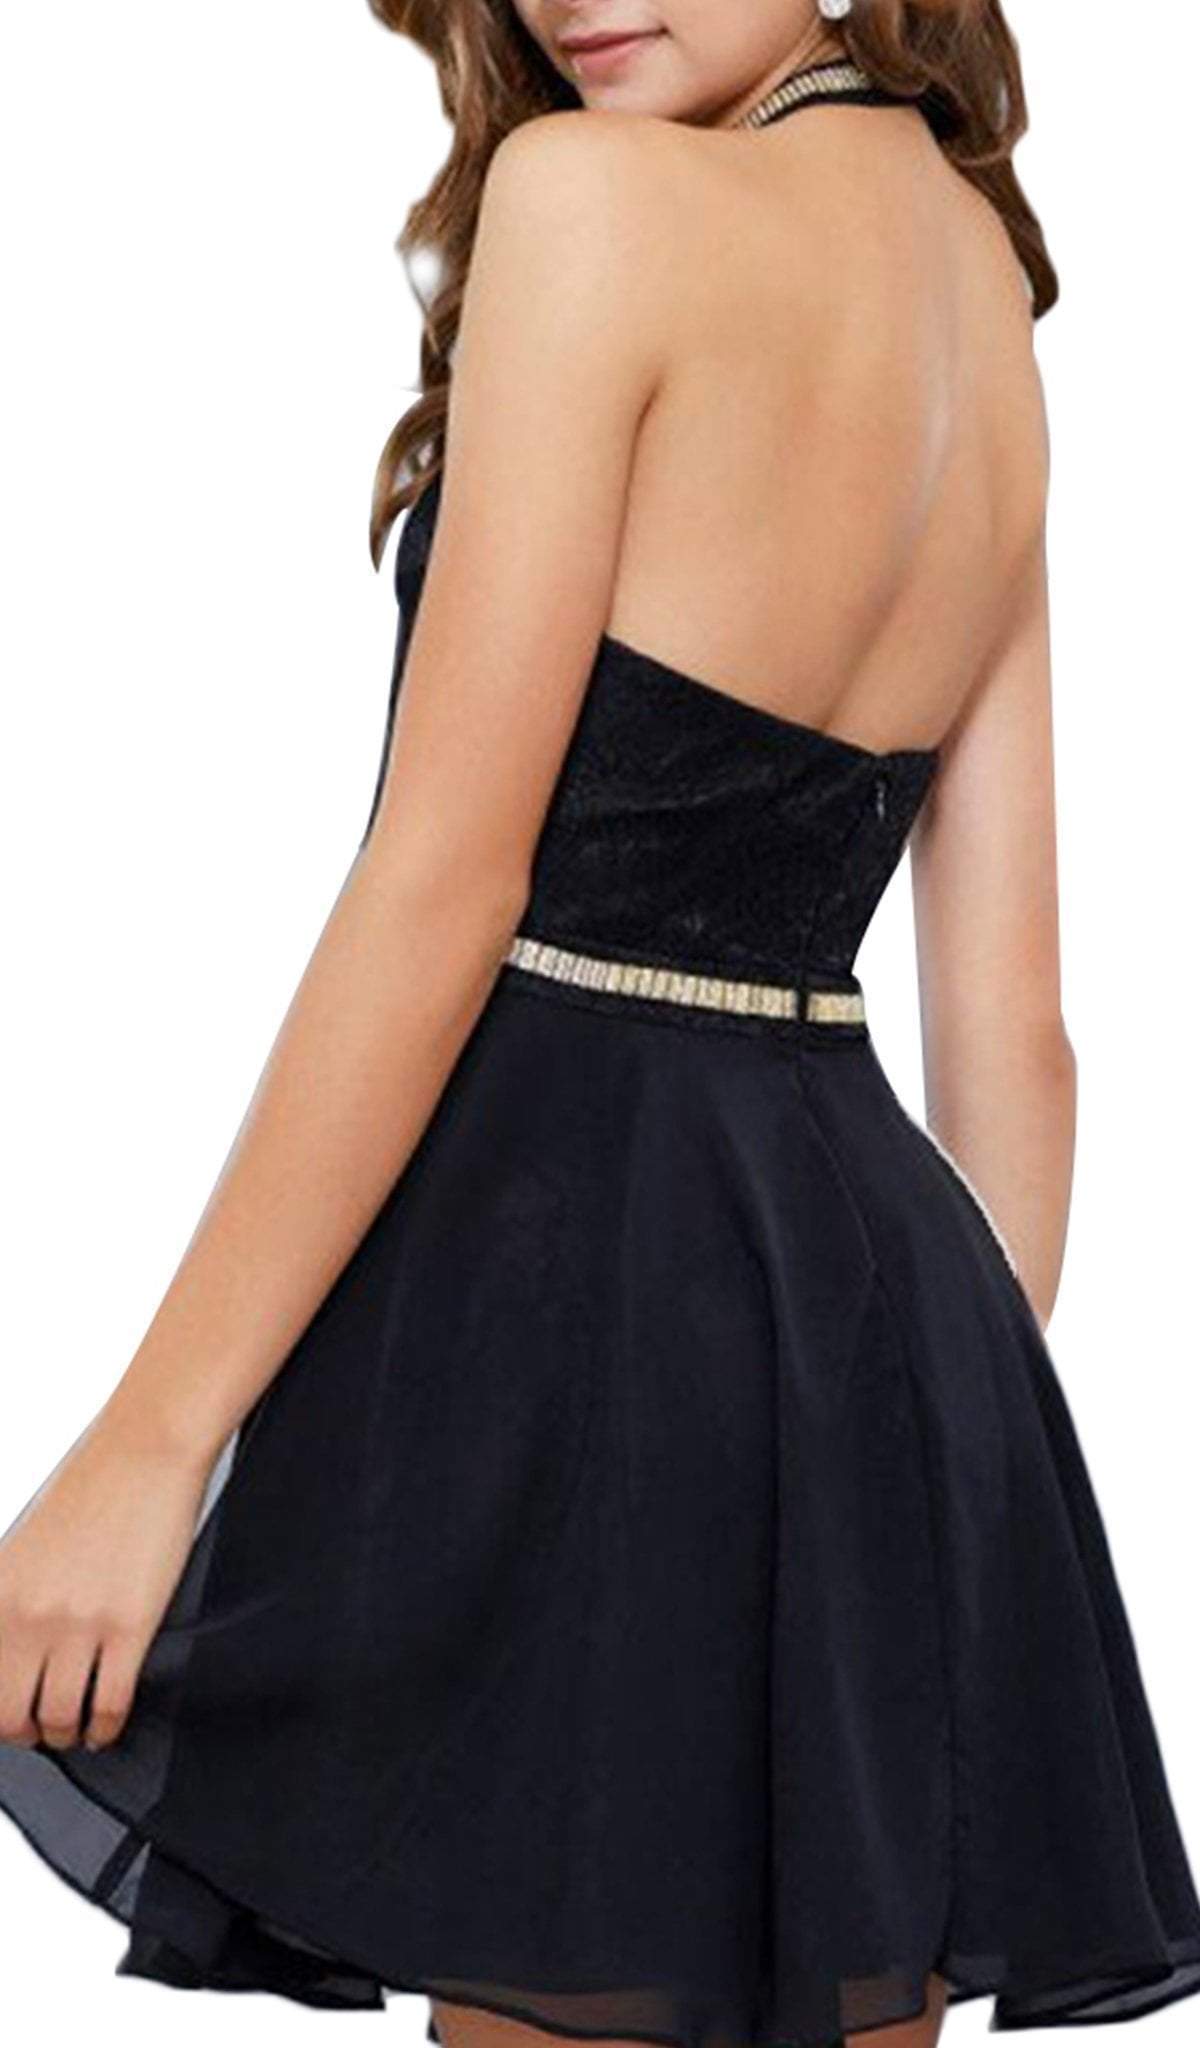 Nox Anabel - 6225 Illusion High Halter Lace Cocktail Dress Special Occasion Dress XS / Black